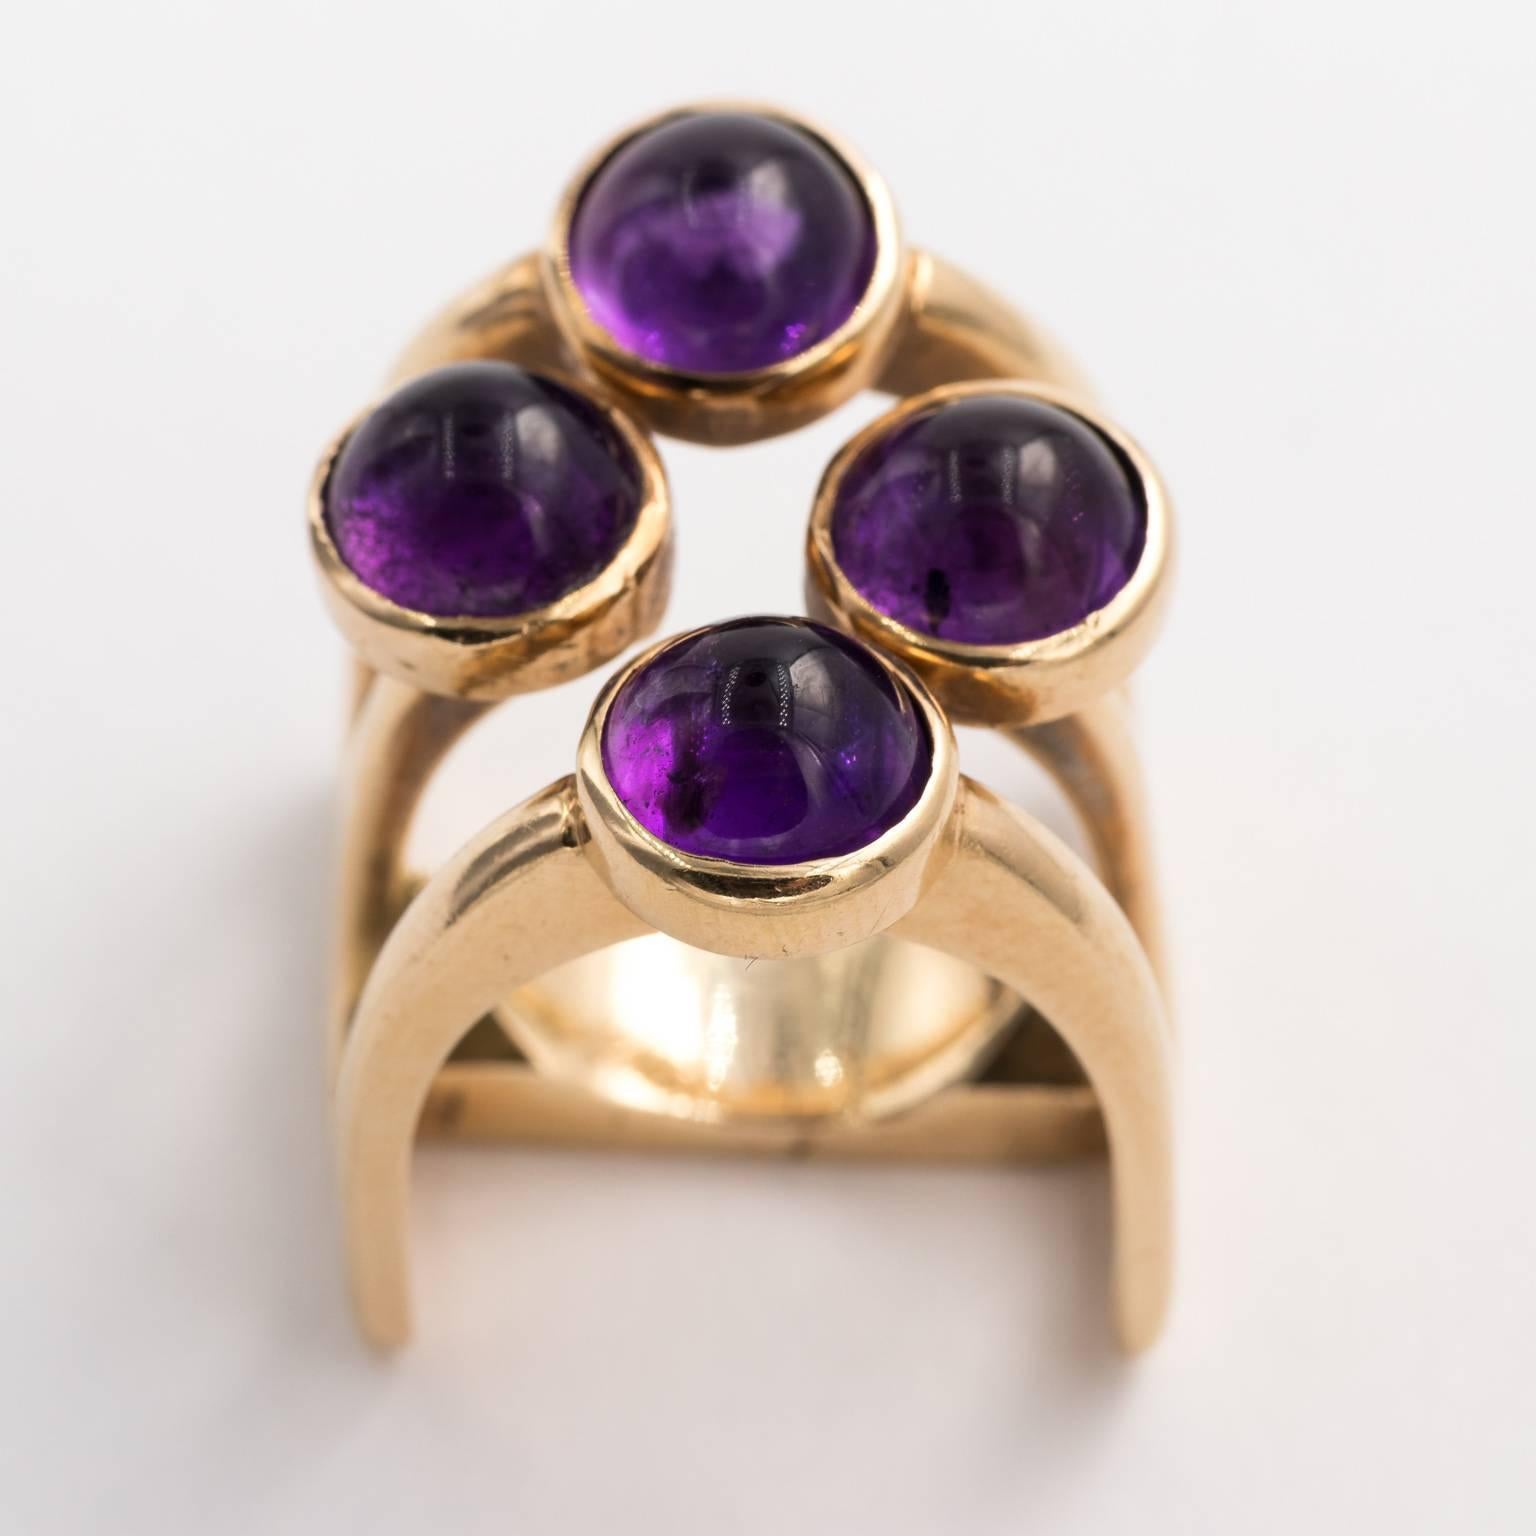 Contemporary handmade studio 14 kt gold abstract ring with amethysts. Ring size 6.75-7 inches.
